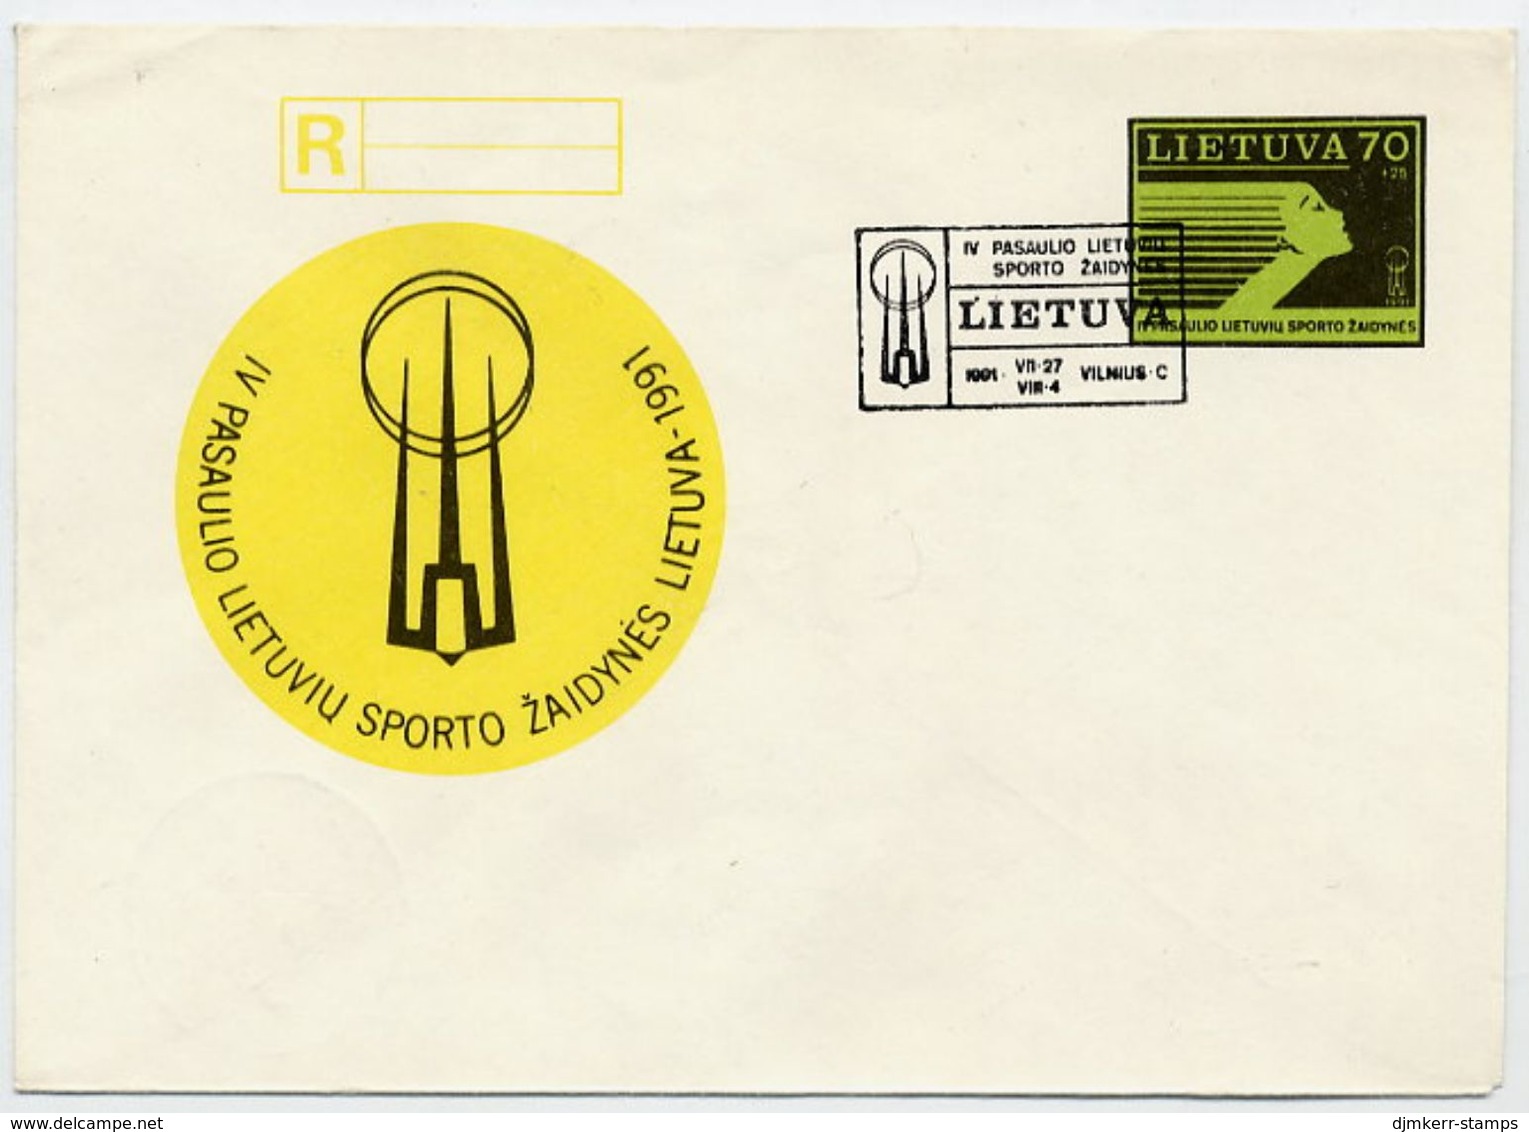 LITHUANIA 1991 Lithuanian World Games Registration Stationery Envelope, Cancelled.  Michel EU2 - Lituanie